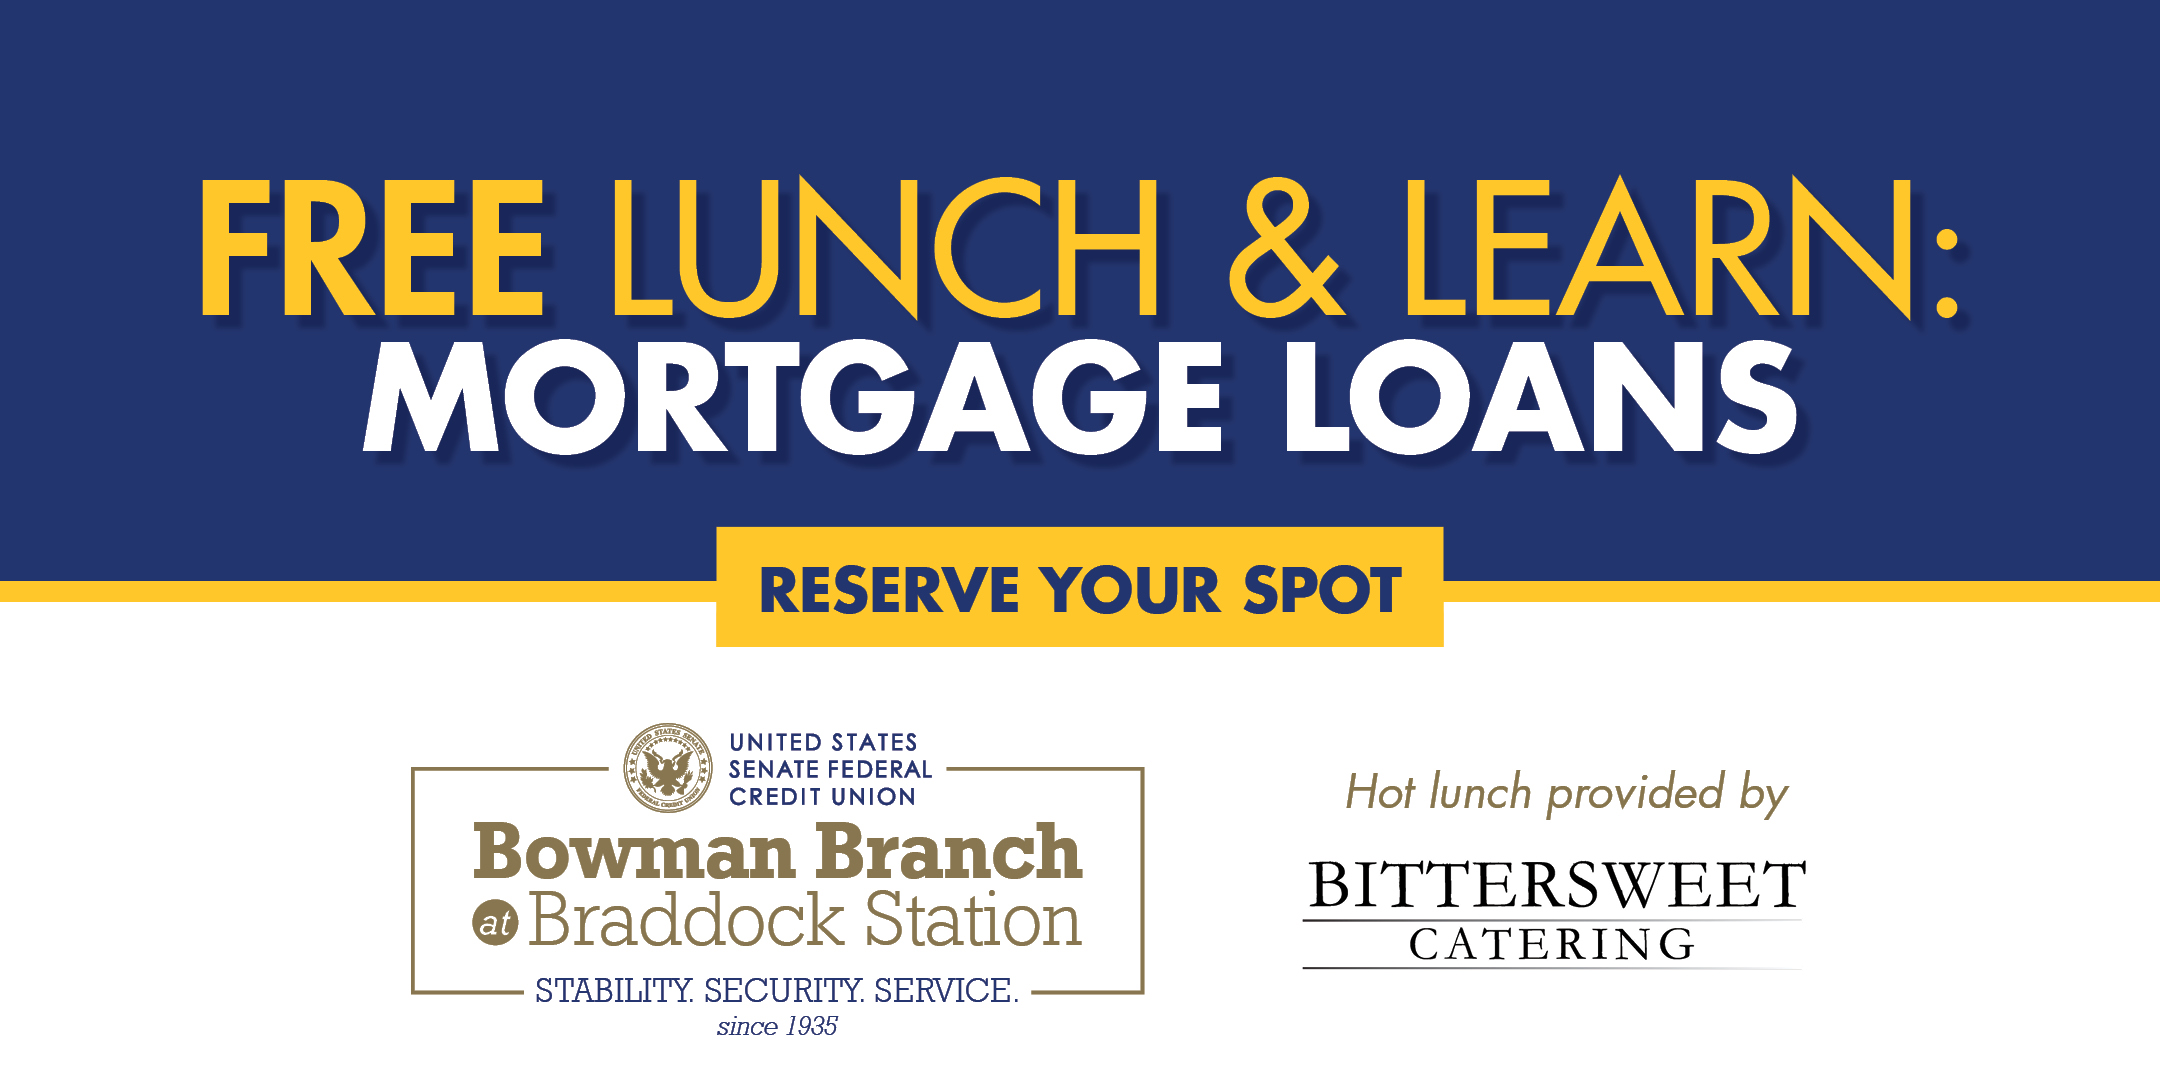 USSFCU Mortgage Lunch & Learn Register Now